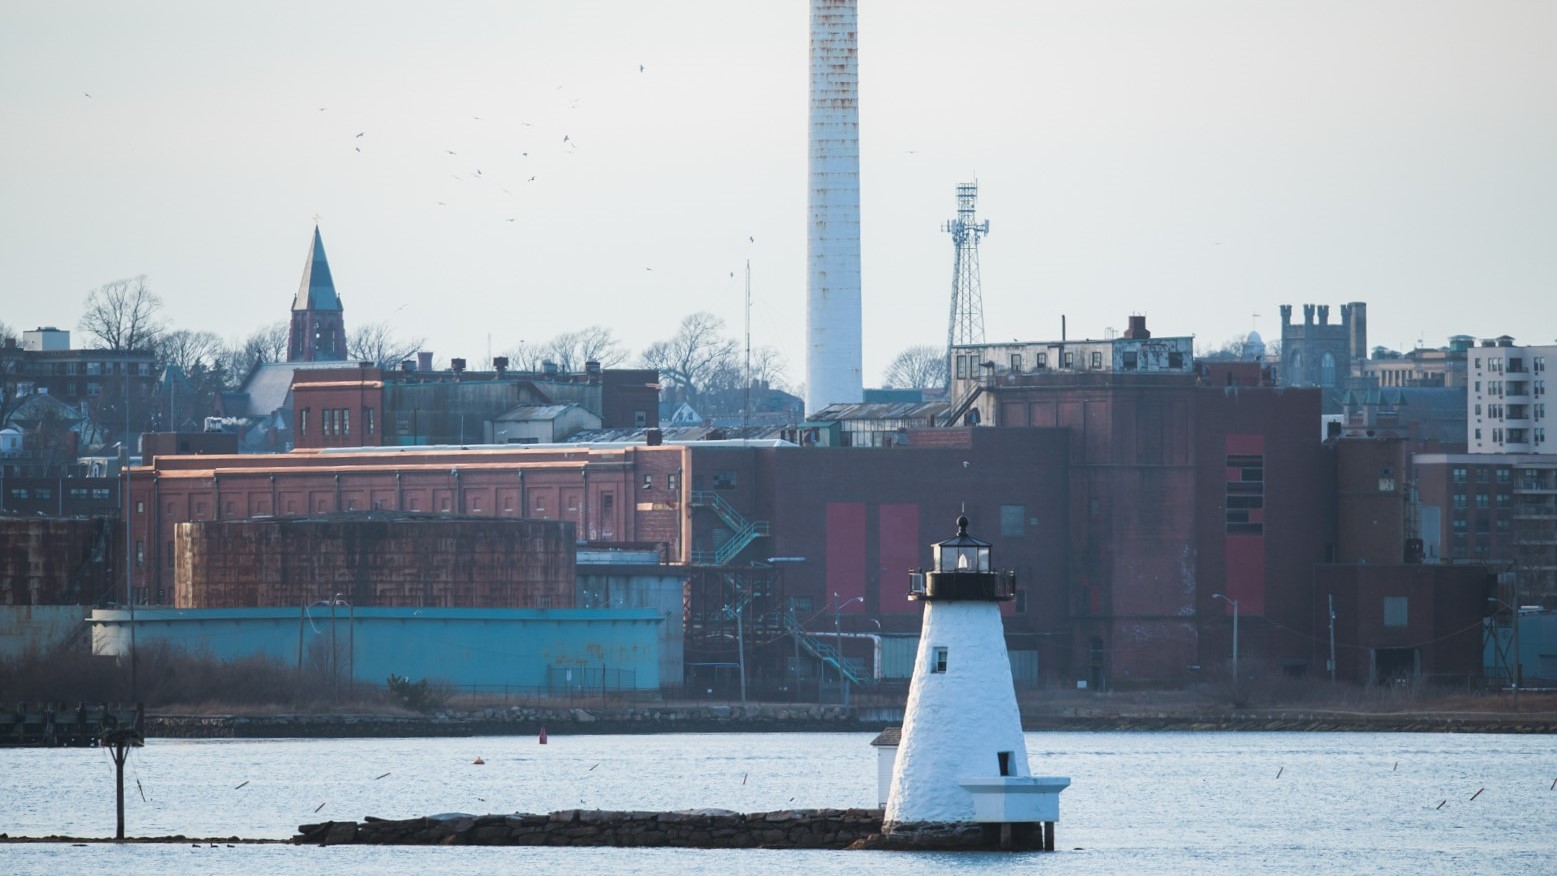 The EPA has spent close to $1 billion removing PCBs from the bottom of New Bedford's harbor.